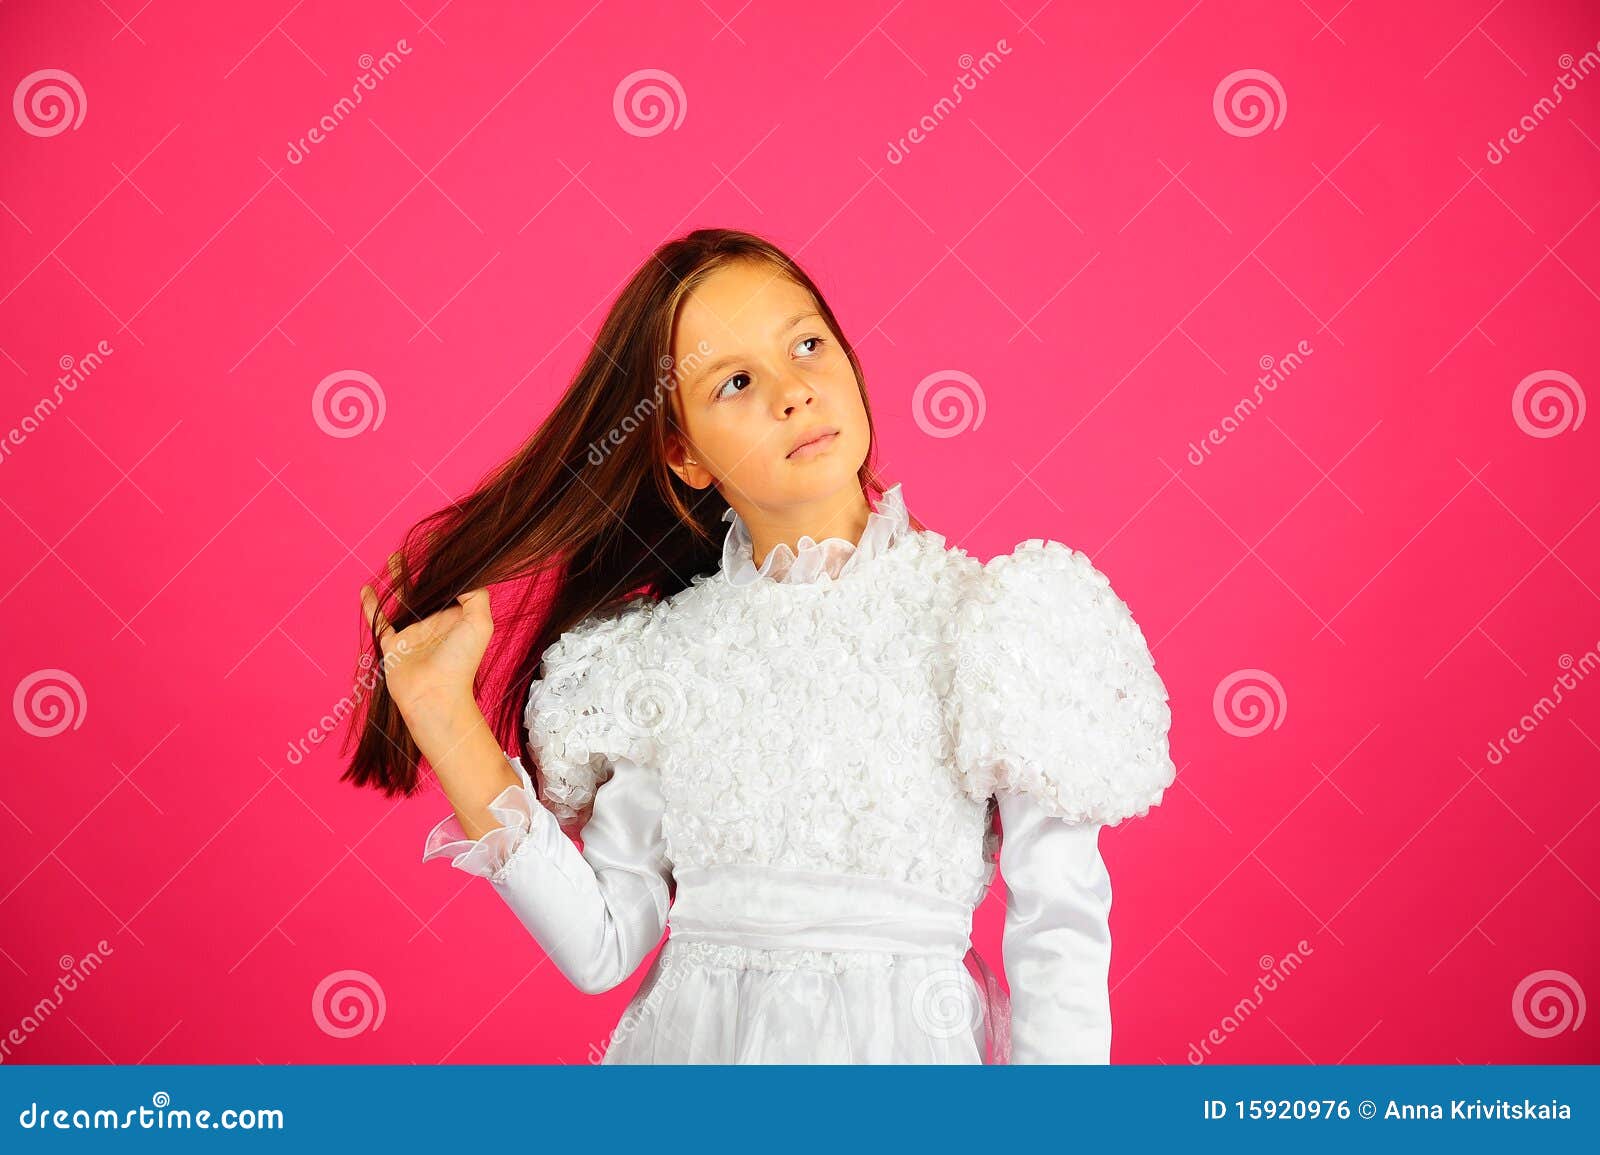 The Girl in a White Dress on a Pink Background Stock Photo - Image of ...